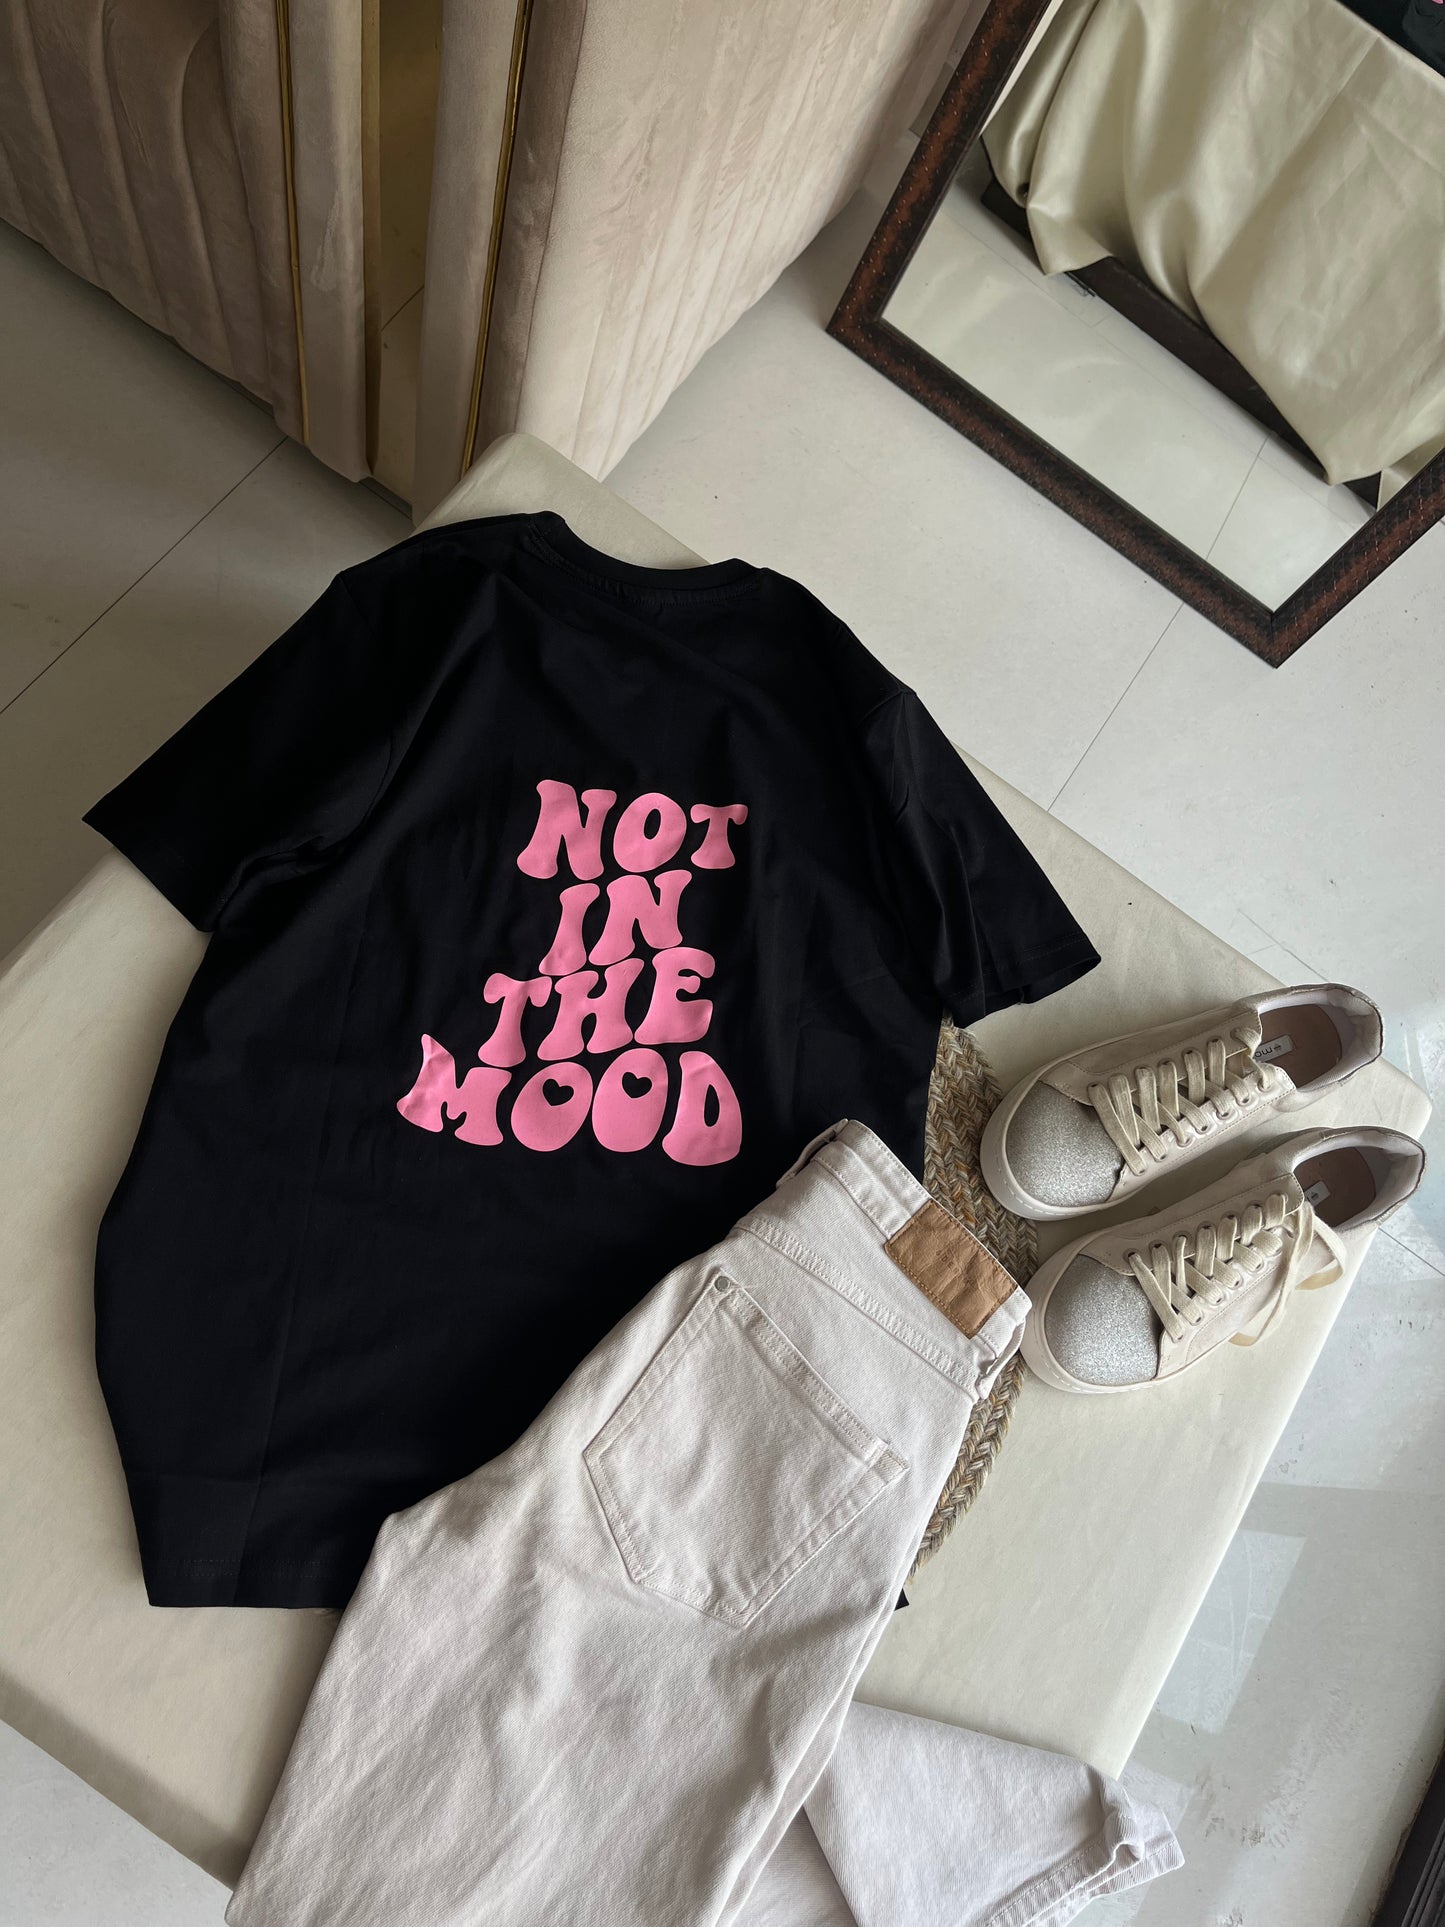 Not in the mood tee